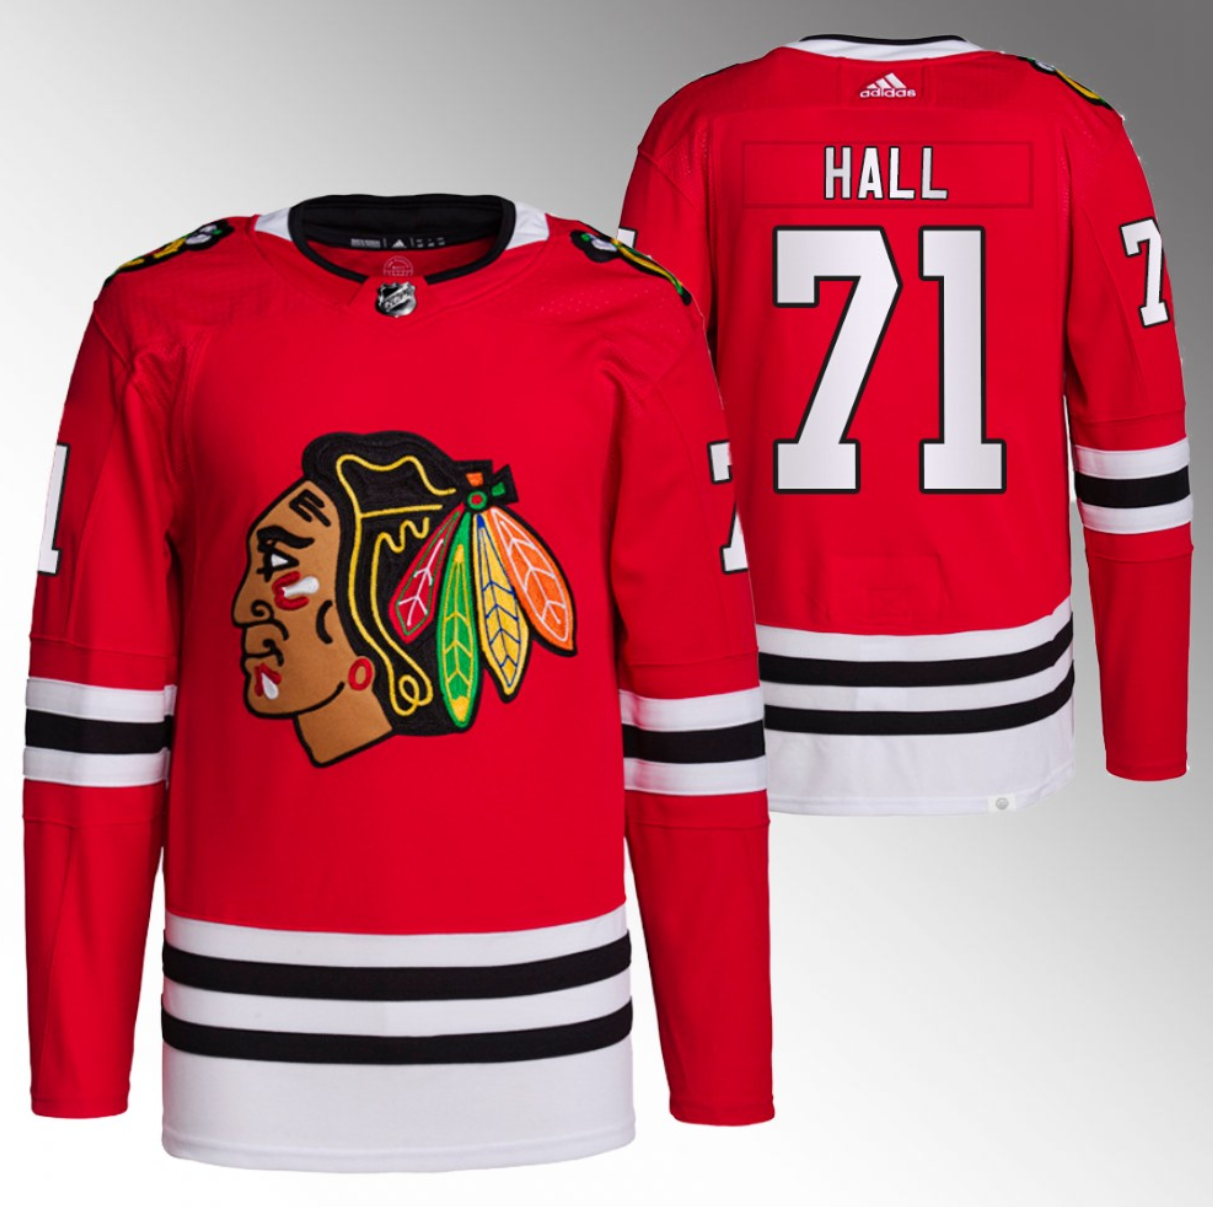 Chicago Blackhawks #71 Taylor Hall Red Stitched Jersey